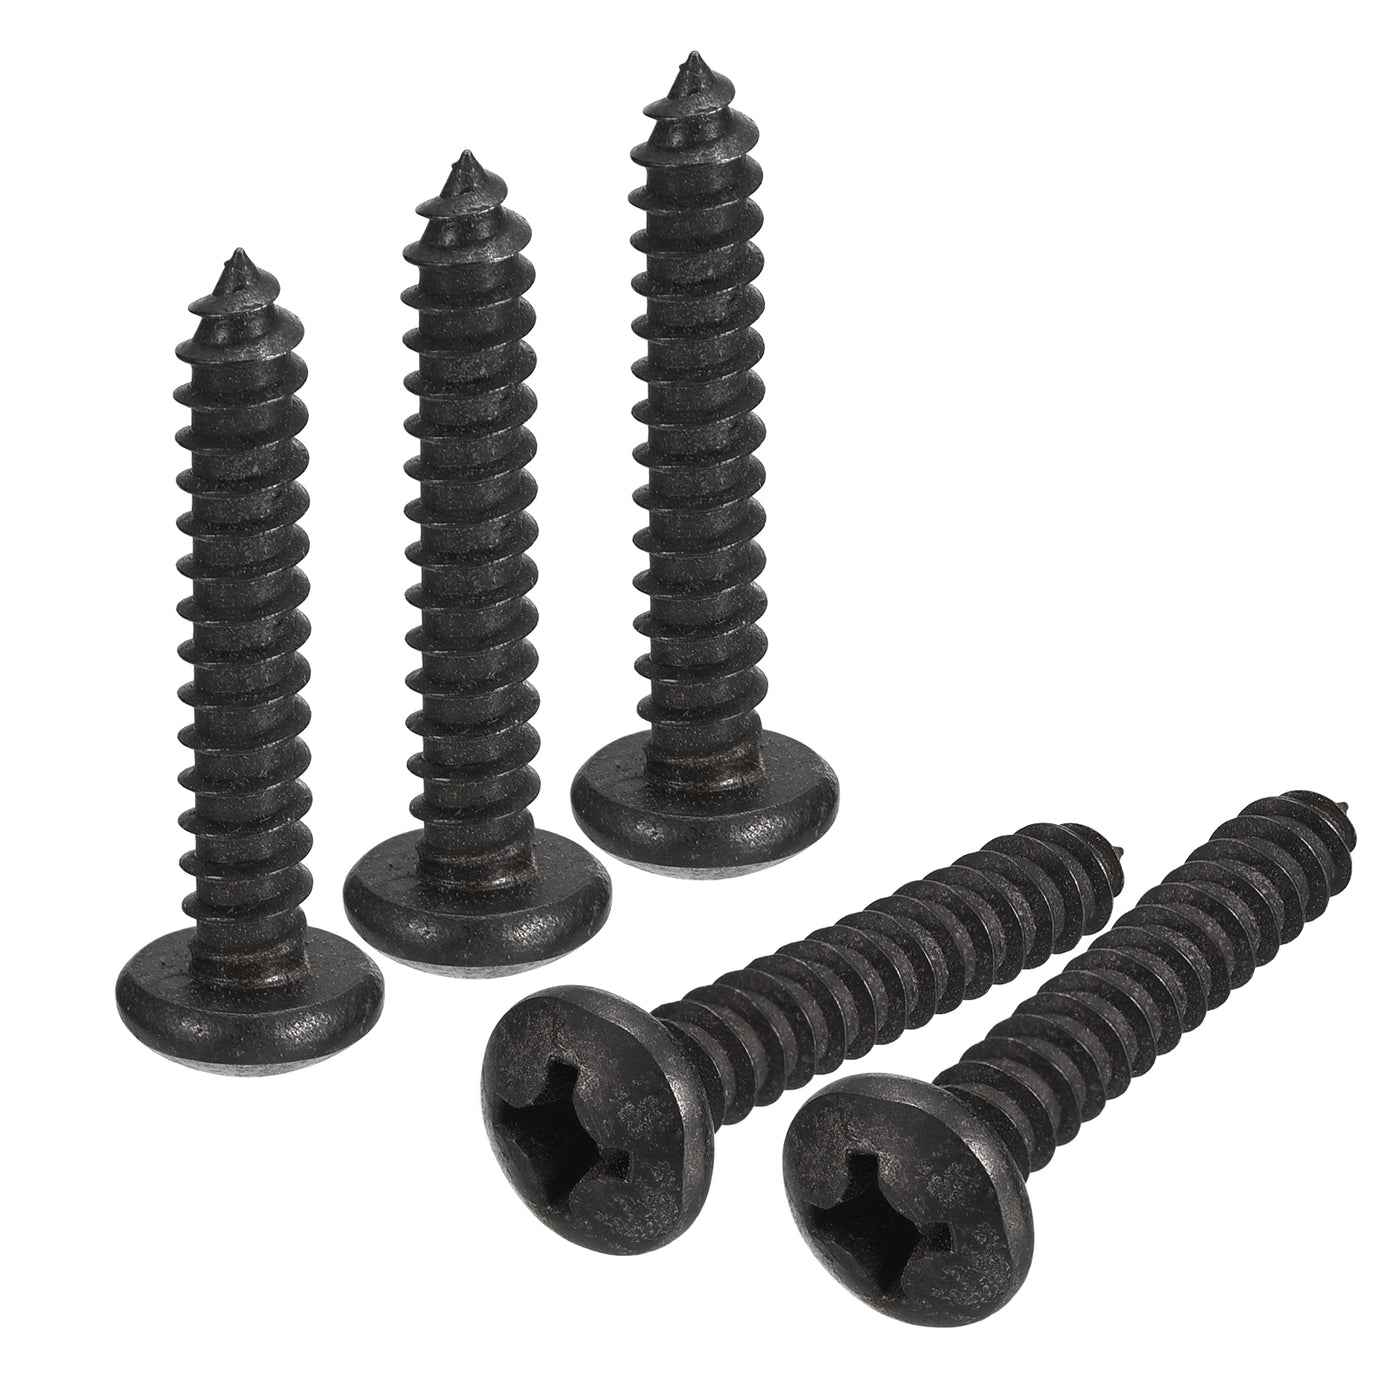 uxcell Uxcell 1/4 x 1-3/16" Phillips Pan Head Self-tapping Screw, 25pcs - 304 Stainless Steel Round Head Wood Screw Full Thread (Black)